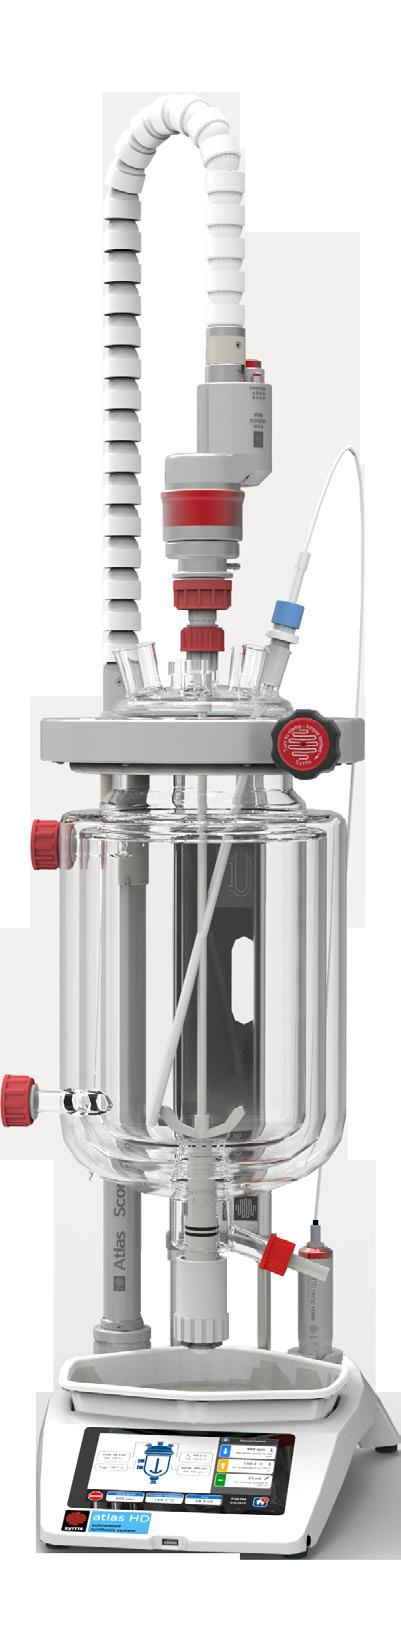 Simple vessel height adjustments together with clever clamping solutions allow full vessel range to be used on a single system Wide range of vessels 50ml, 100ml, 250ml, 500ml, 1L, 2L and 5L with a